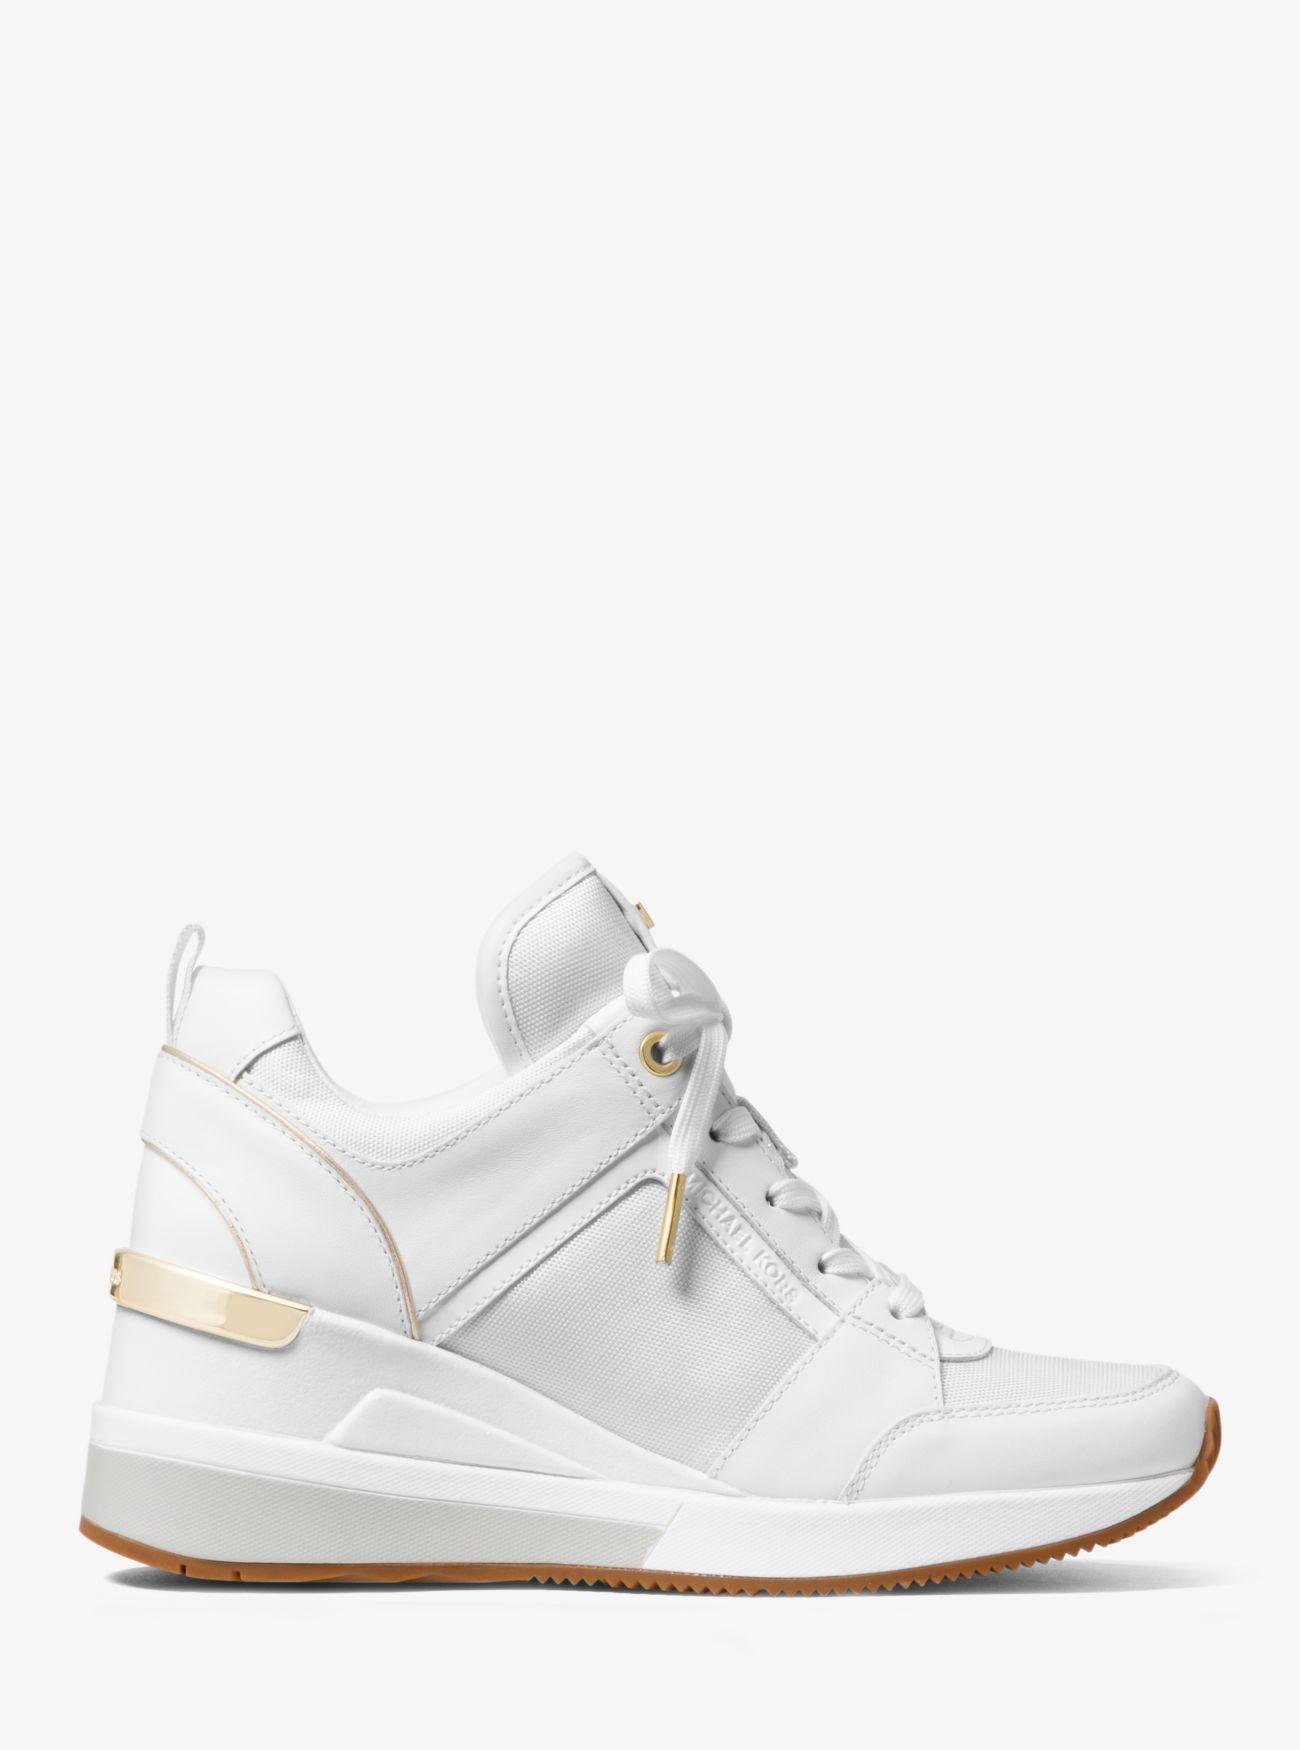 Michael Kors Georgie Canvas And Leather Sneaker in White | Lyst UK